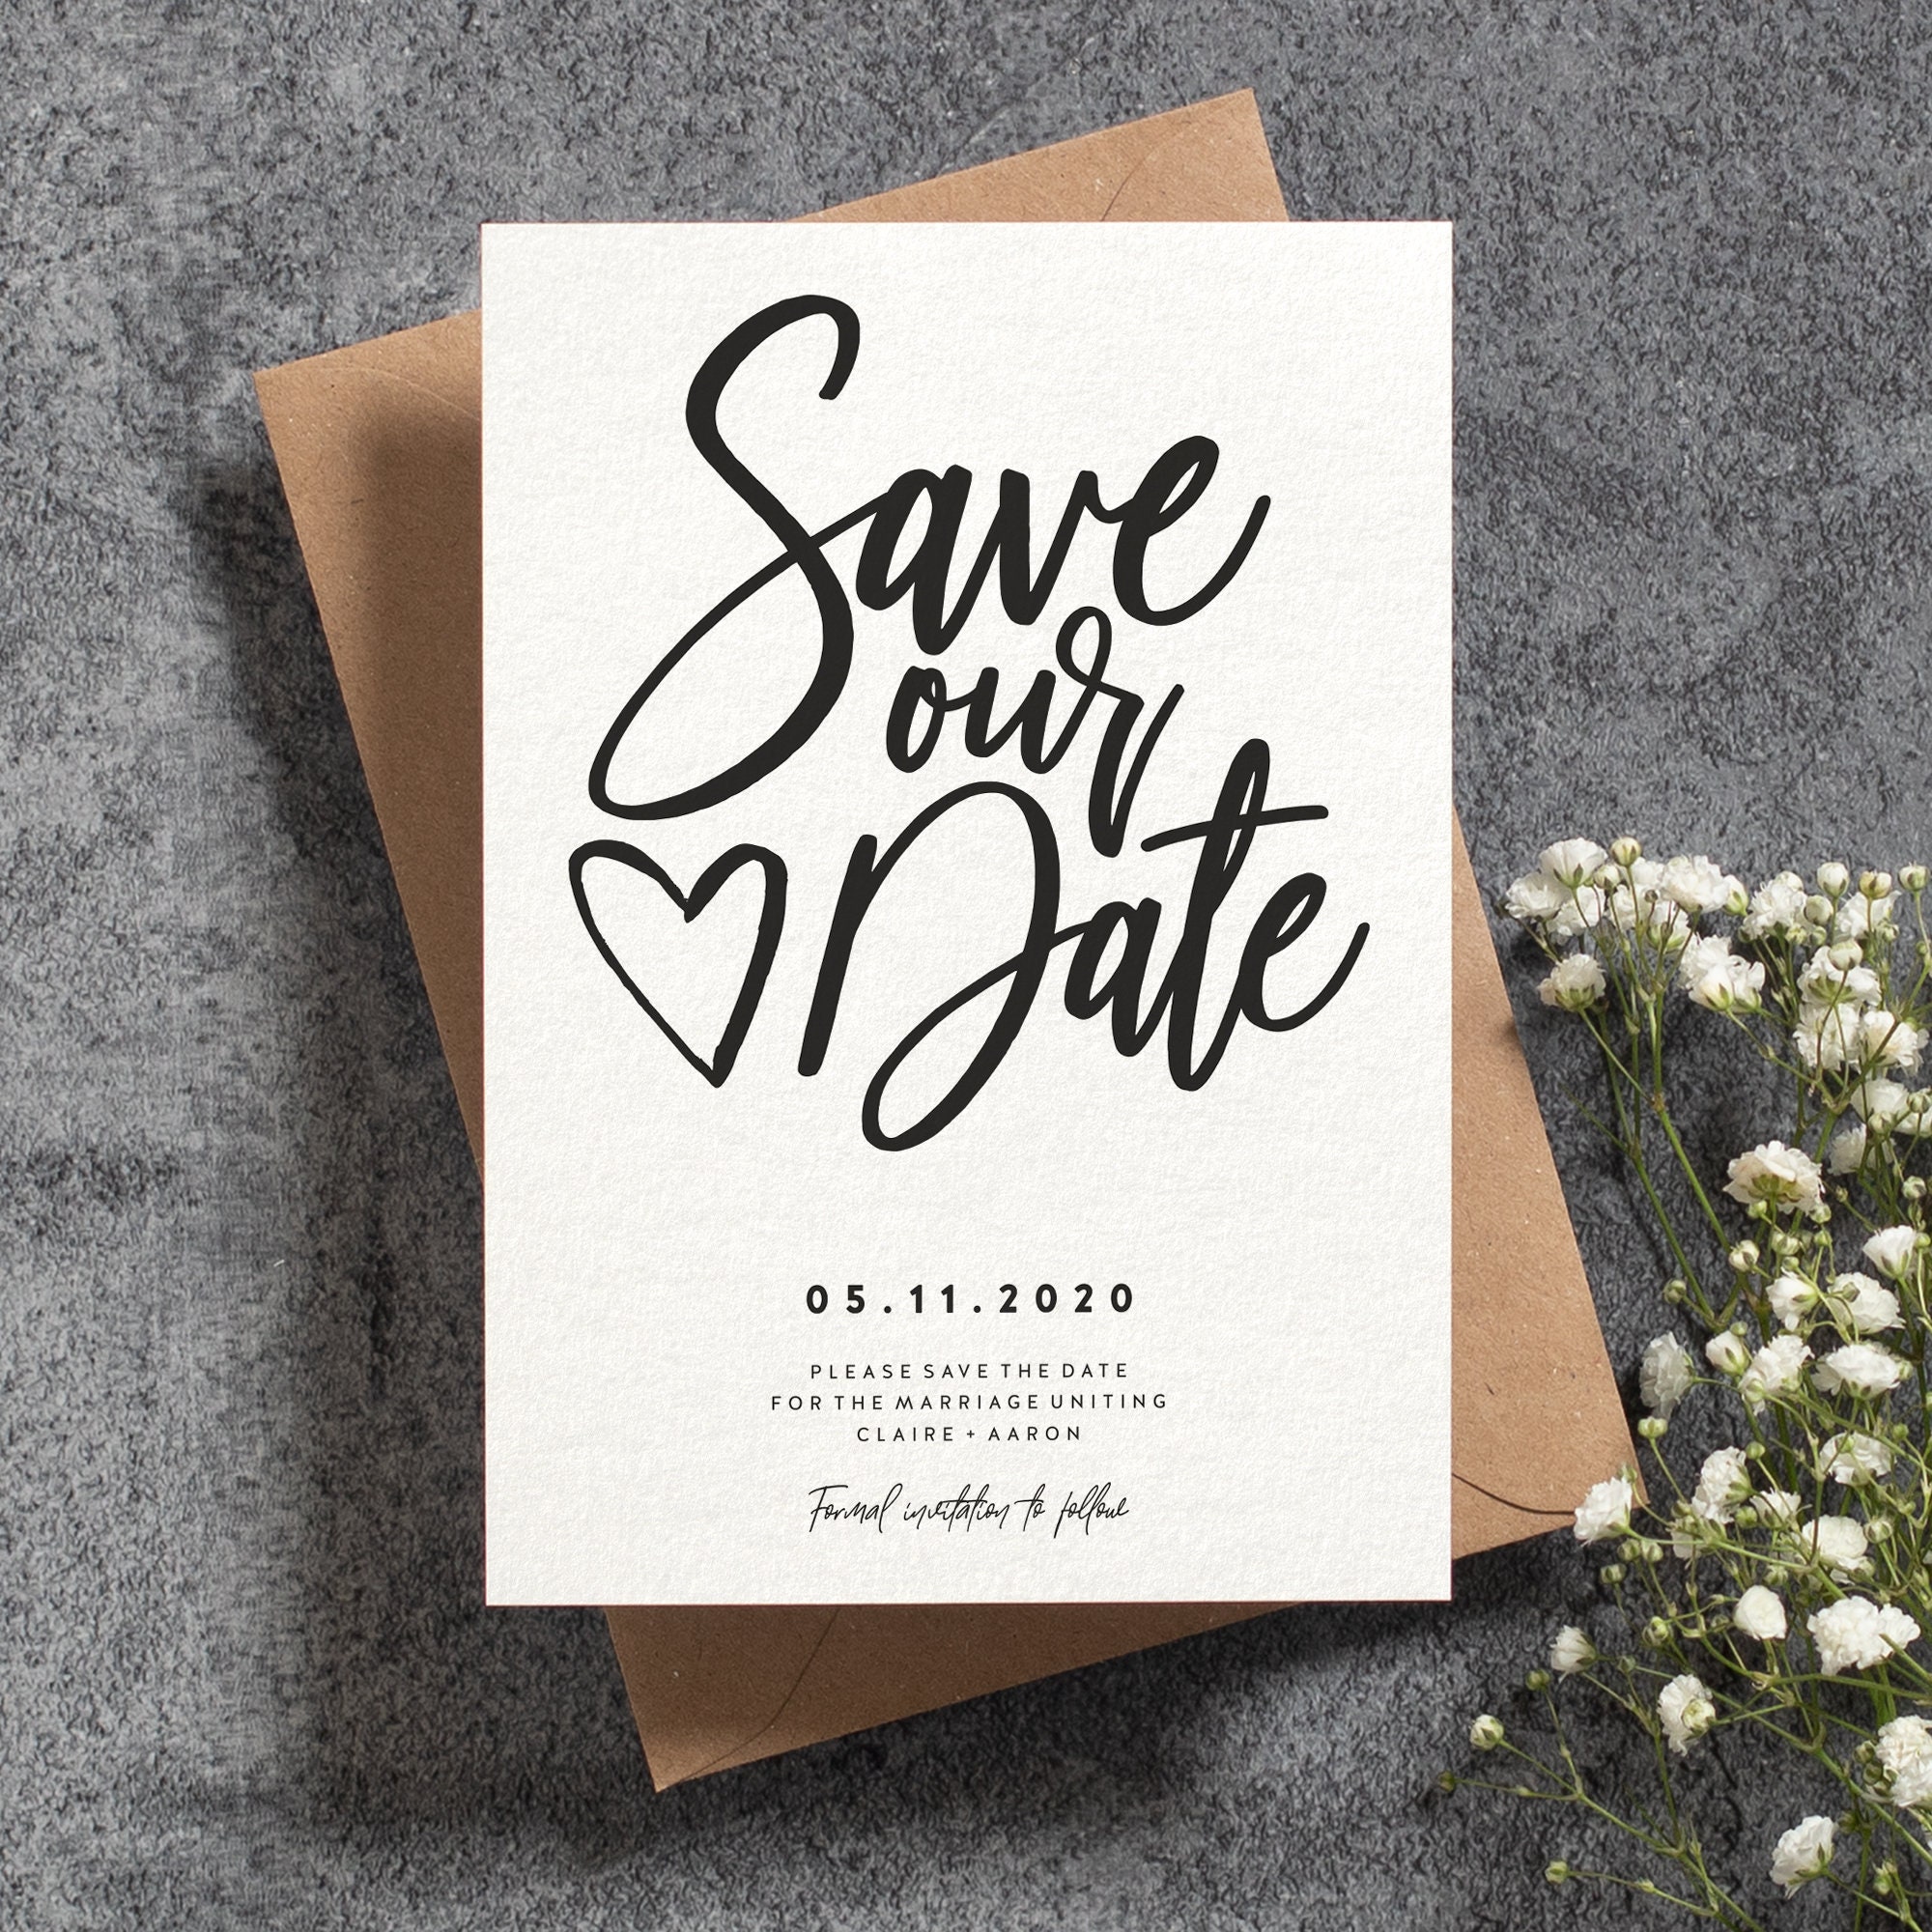 Save the Dates vs Wedding Invitations - whats the difference?